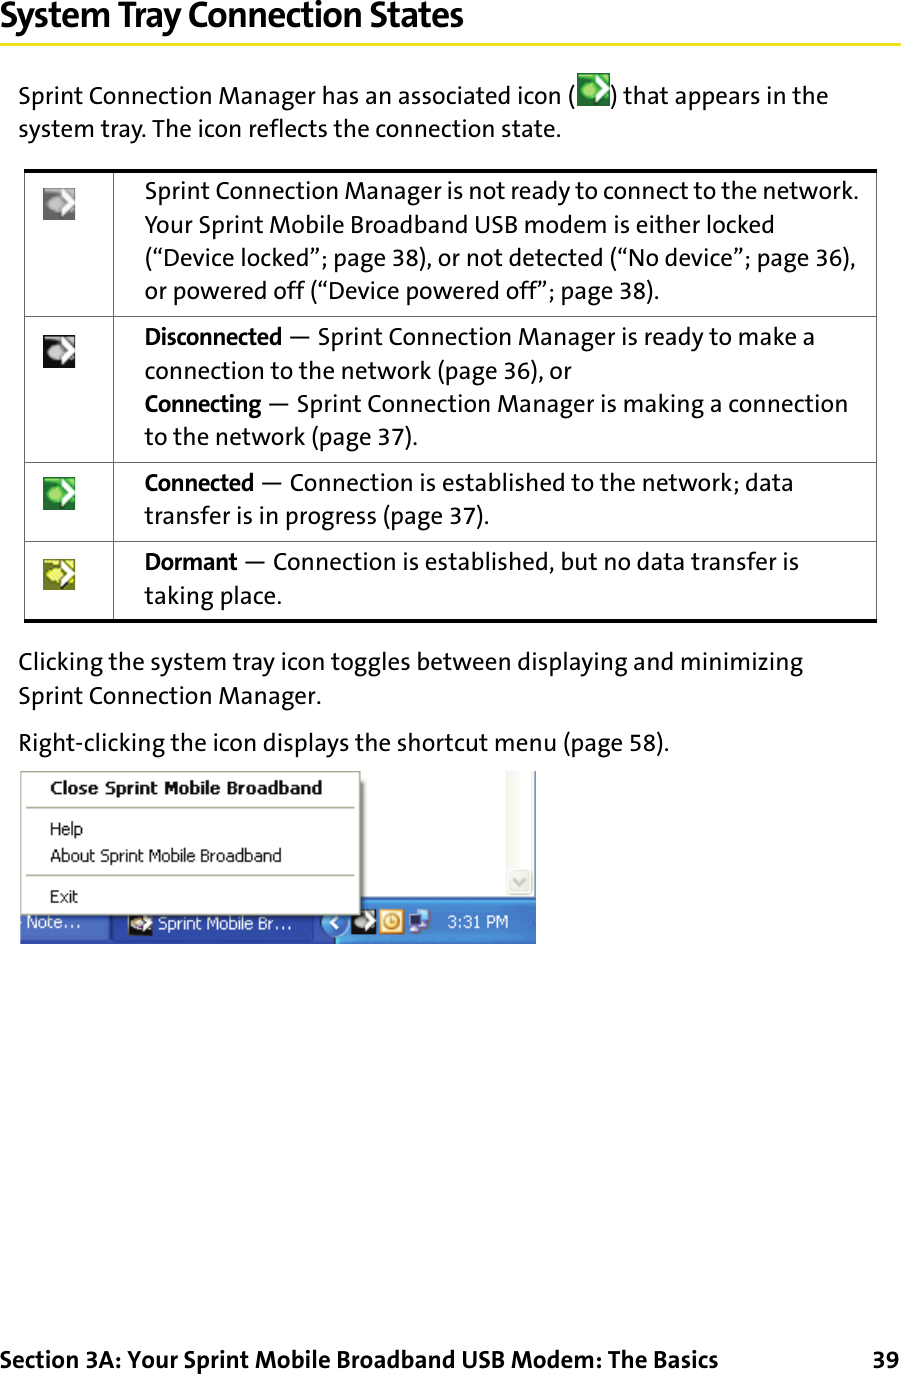 Section 3A: Your Sprint Mobile Broadband USB Modem: The Basics      39System Tray Connection StatesSprint Connection Manager has an associated icon ( ) that appears in the system tray. The icon reflects the connection state.Clicking the system tray icon toggles between displaying and minimizing Sprint Connection Manager.Right-clicking the icon displays the shortcut menu (page 58).Sprint Connection Manager is not ready to connect to the network. Your Sprint Mobile Broadband USB modem is either locked (“Device locked”; page 38), or not detected (“No device”; page 36), or powered off (“Device powered off”; page 38).Disconnected — Sprint Connection Manager is ready to make a connection to the network (page 36), orConnecting — Sprint Connection Manager is making a connection to the network (page 37).Connected — Connection is established to the network; data transfer is in progress (page 37).Dormant — Connection is established, but no data transfer is taking place.